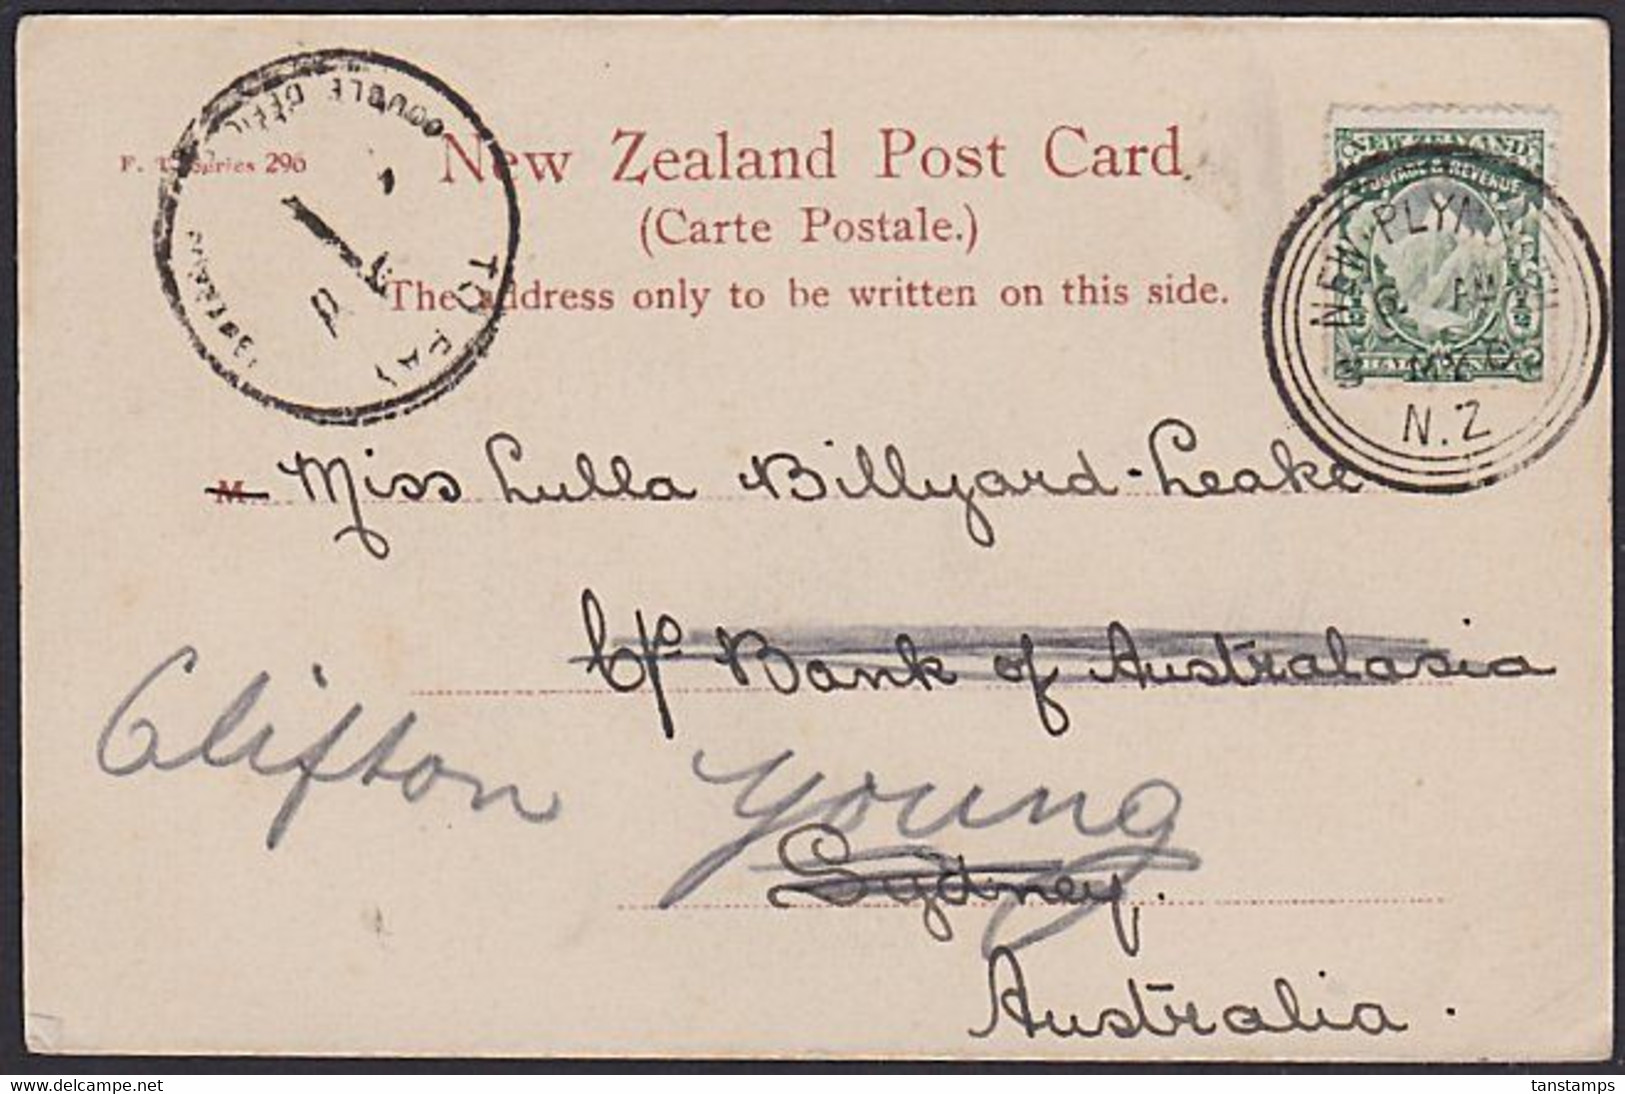 NEW PLYMOUTH BREAKWATER NZ 1905 POSTCARD DOUBLE DEFICIENCY 1d TO PAY POSTMARK - Lettres & Documents